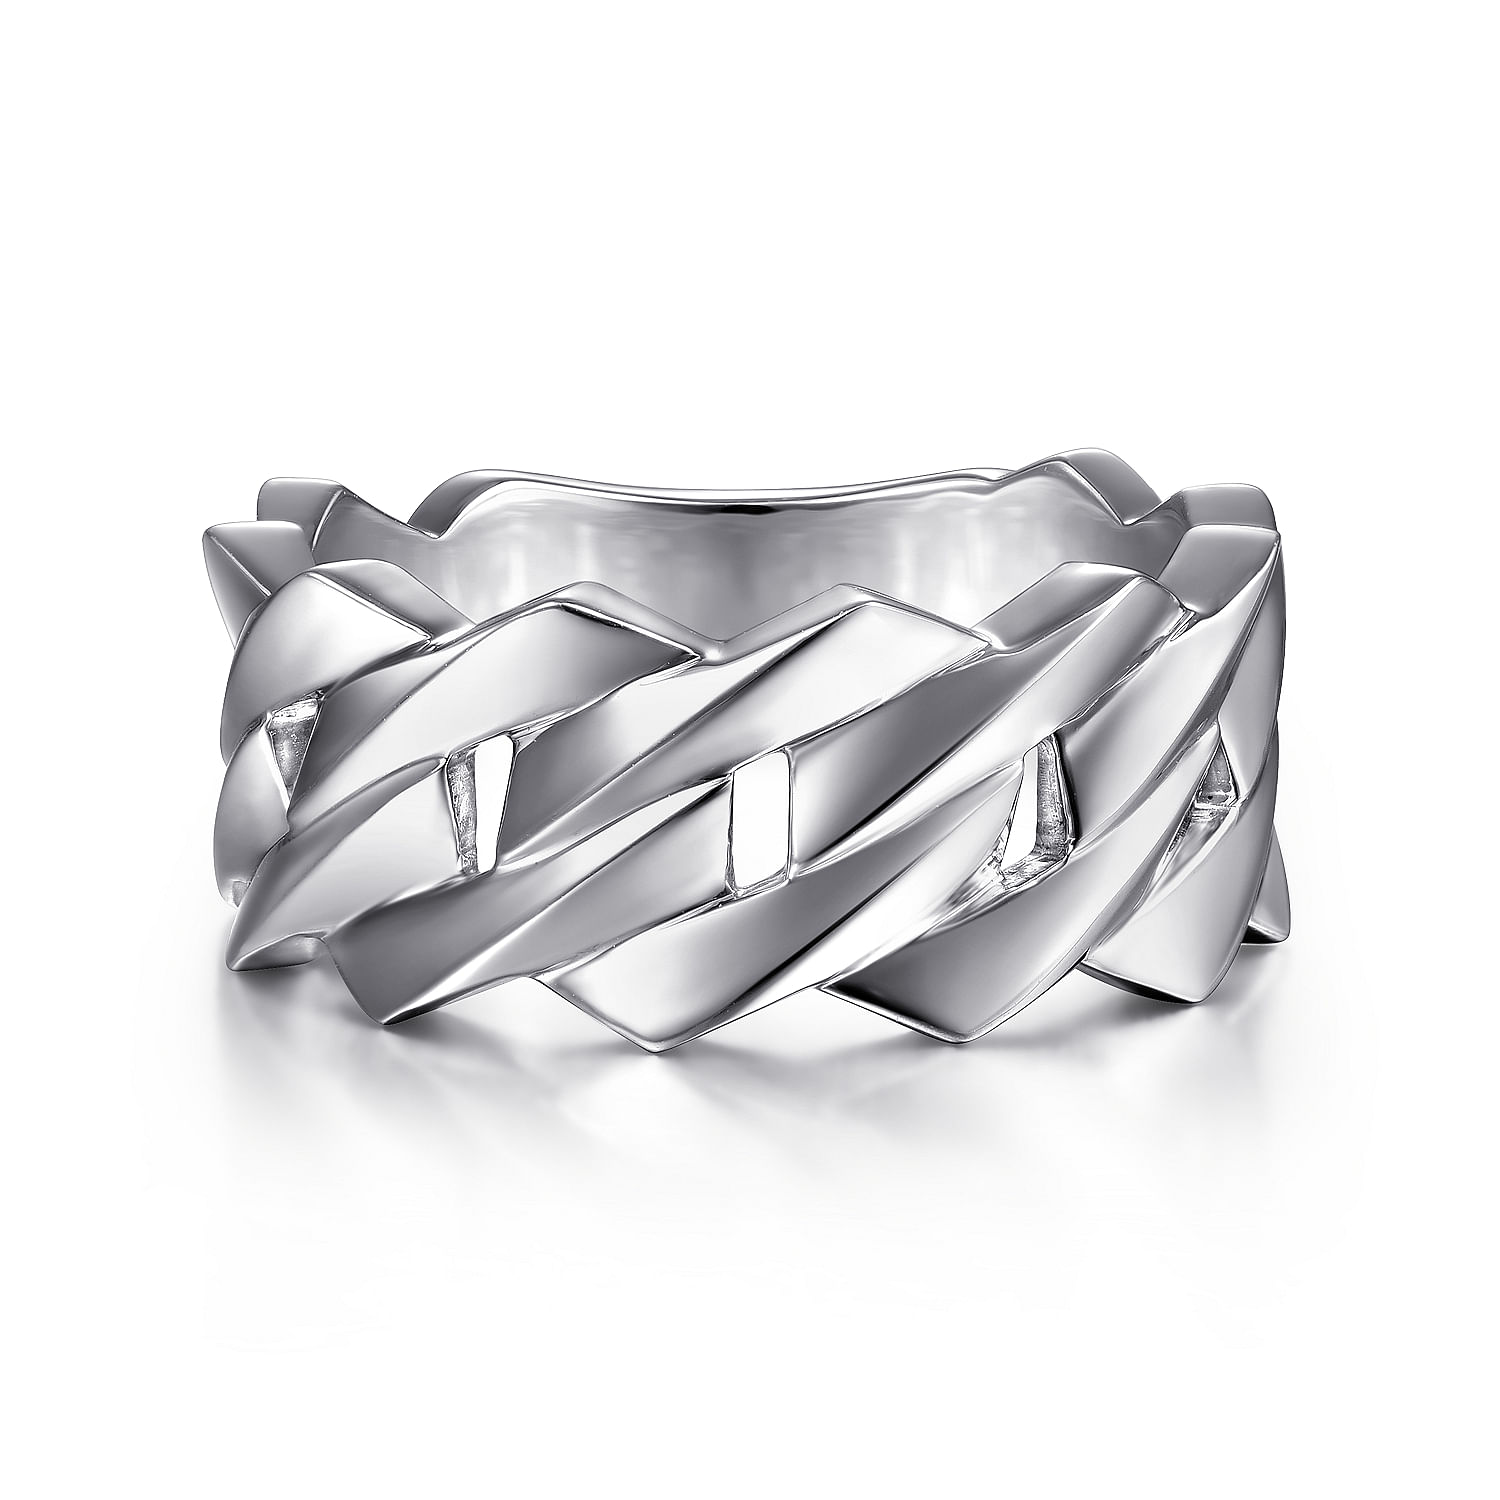 Wide 14K White Gold Chain Link Band in High Polished Finish